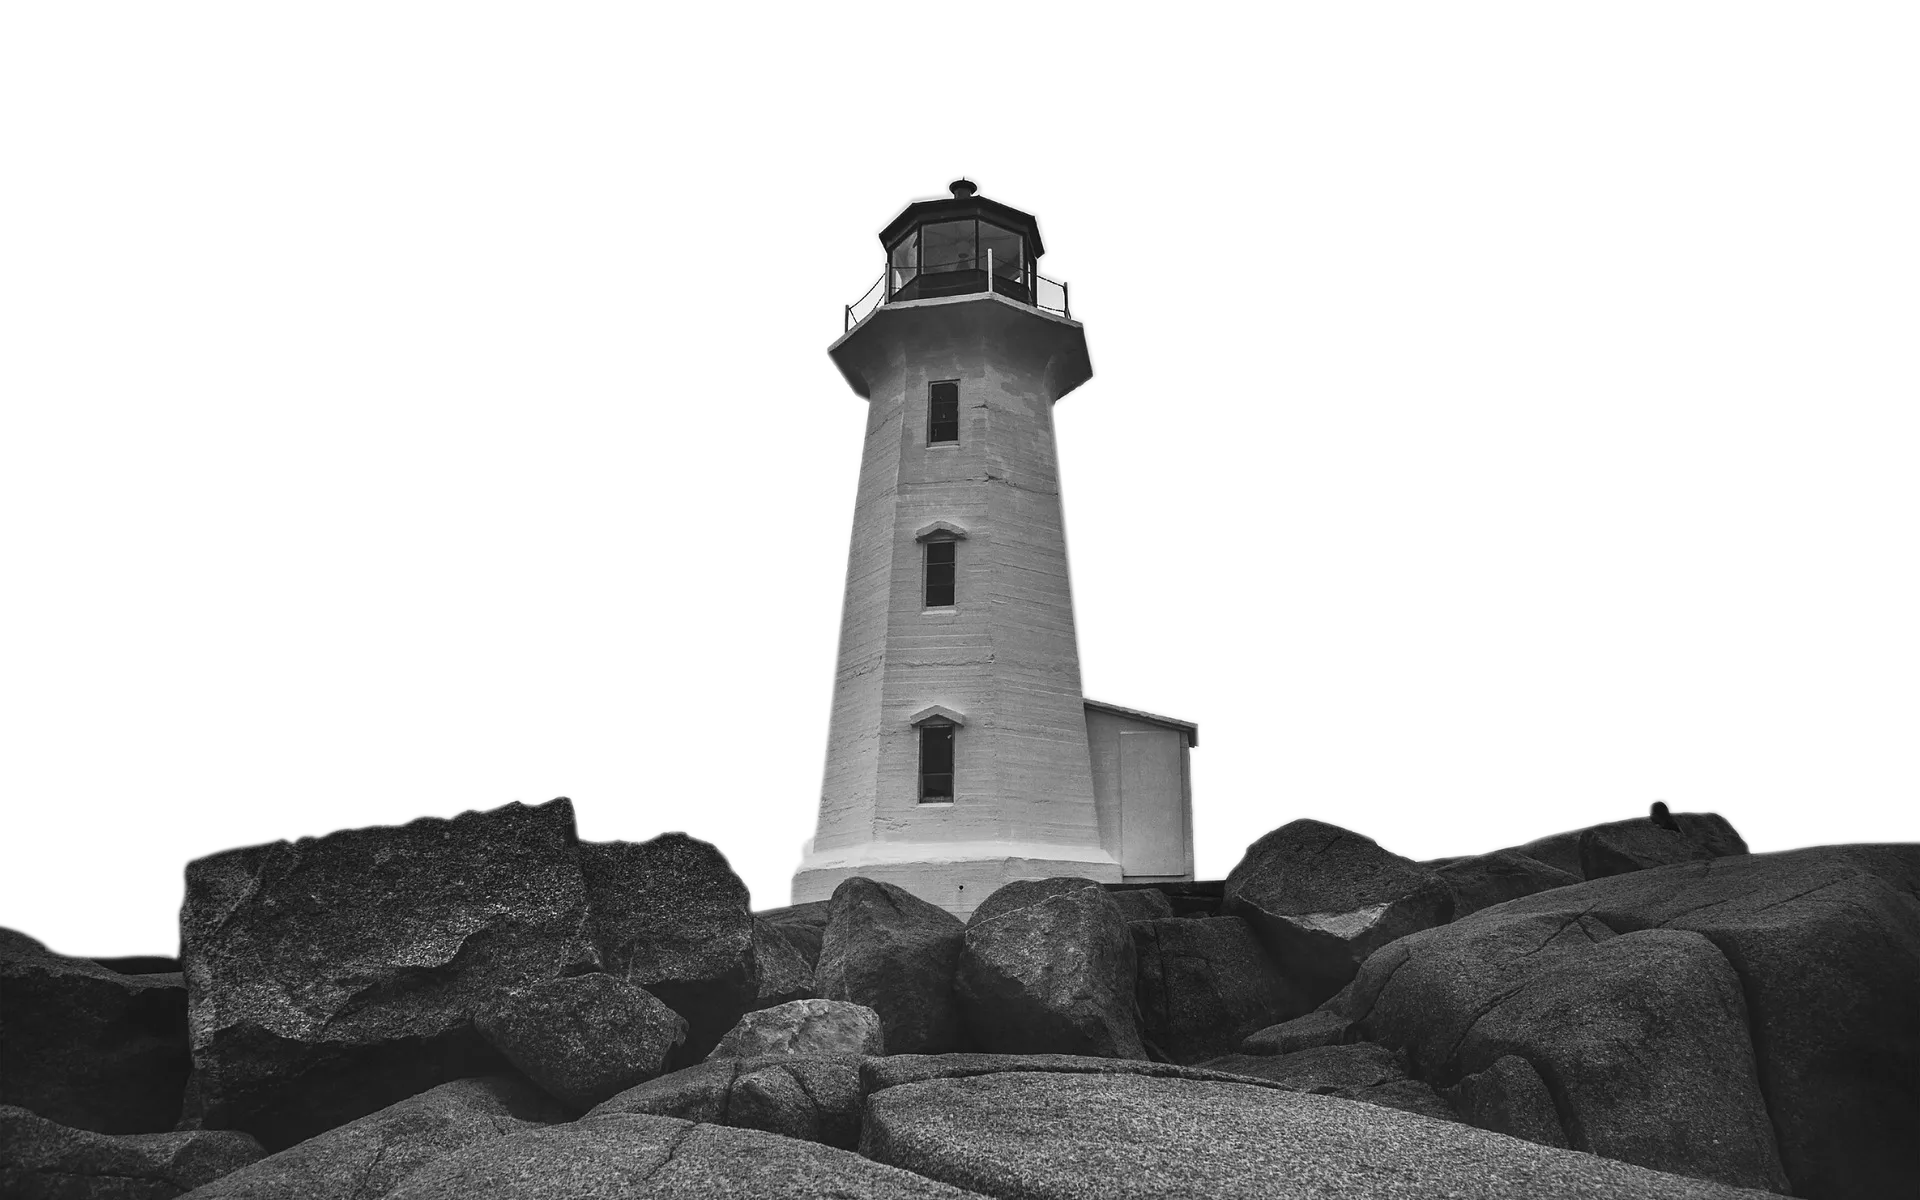 a lighthouse looking out for danger or malicious actors